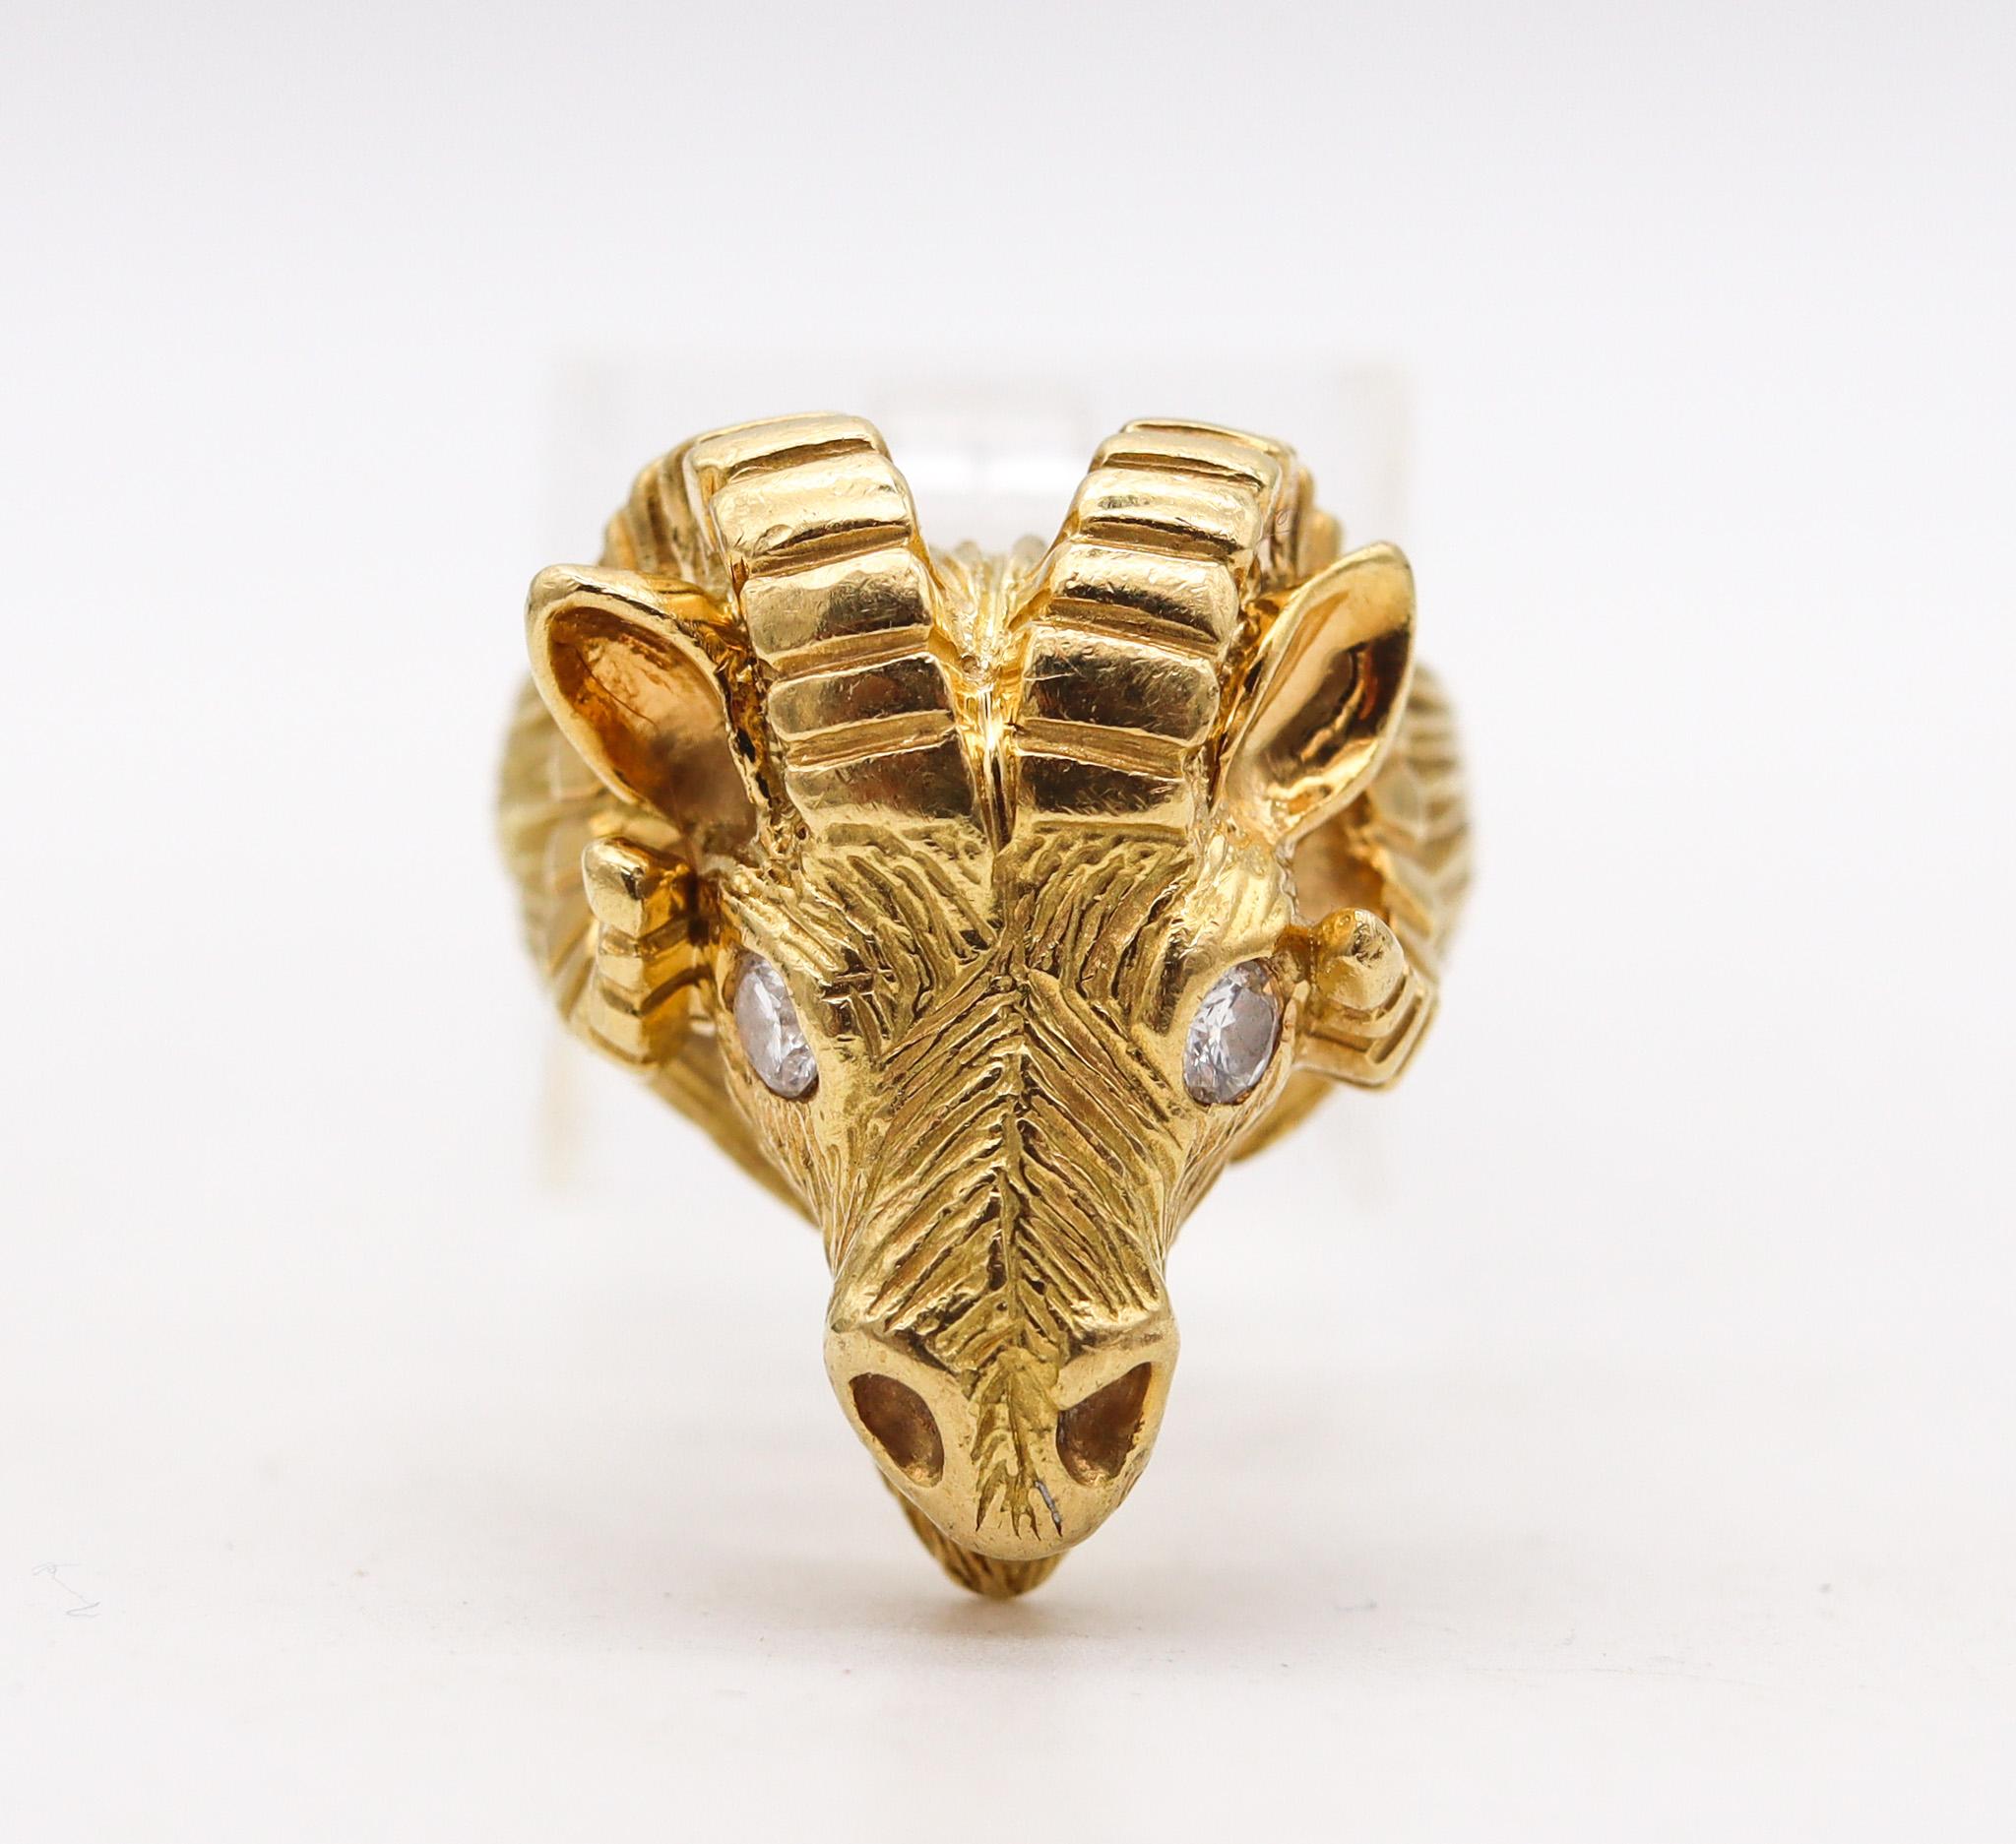 Taurus zodiac ring designed by Van Cleef & Arpels.

Very rare zodiacal ring, created by the jewelry house of Van Cleef & Arpels, back in the 1970. This ring was made up in the shape of a stylized ram for Taurus. Crafted with great details in